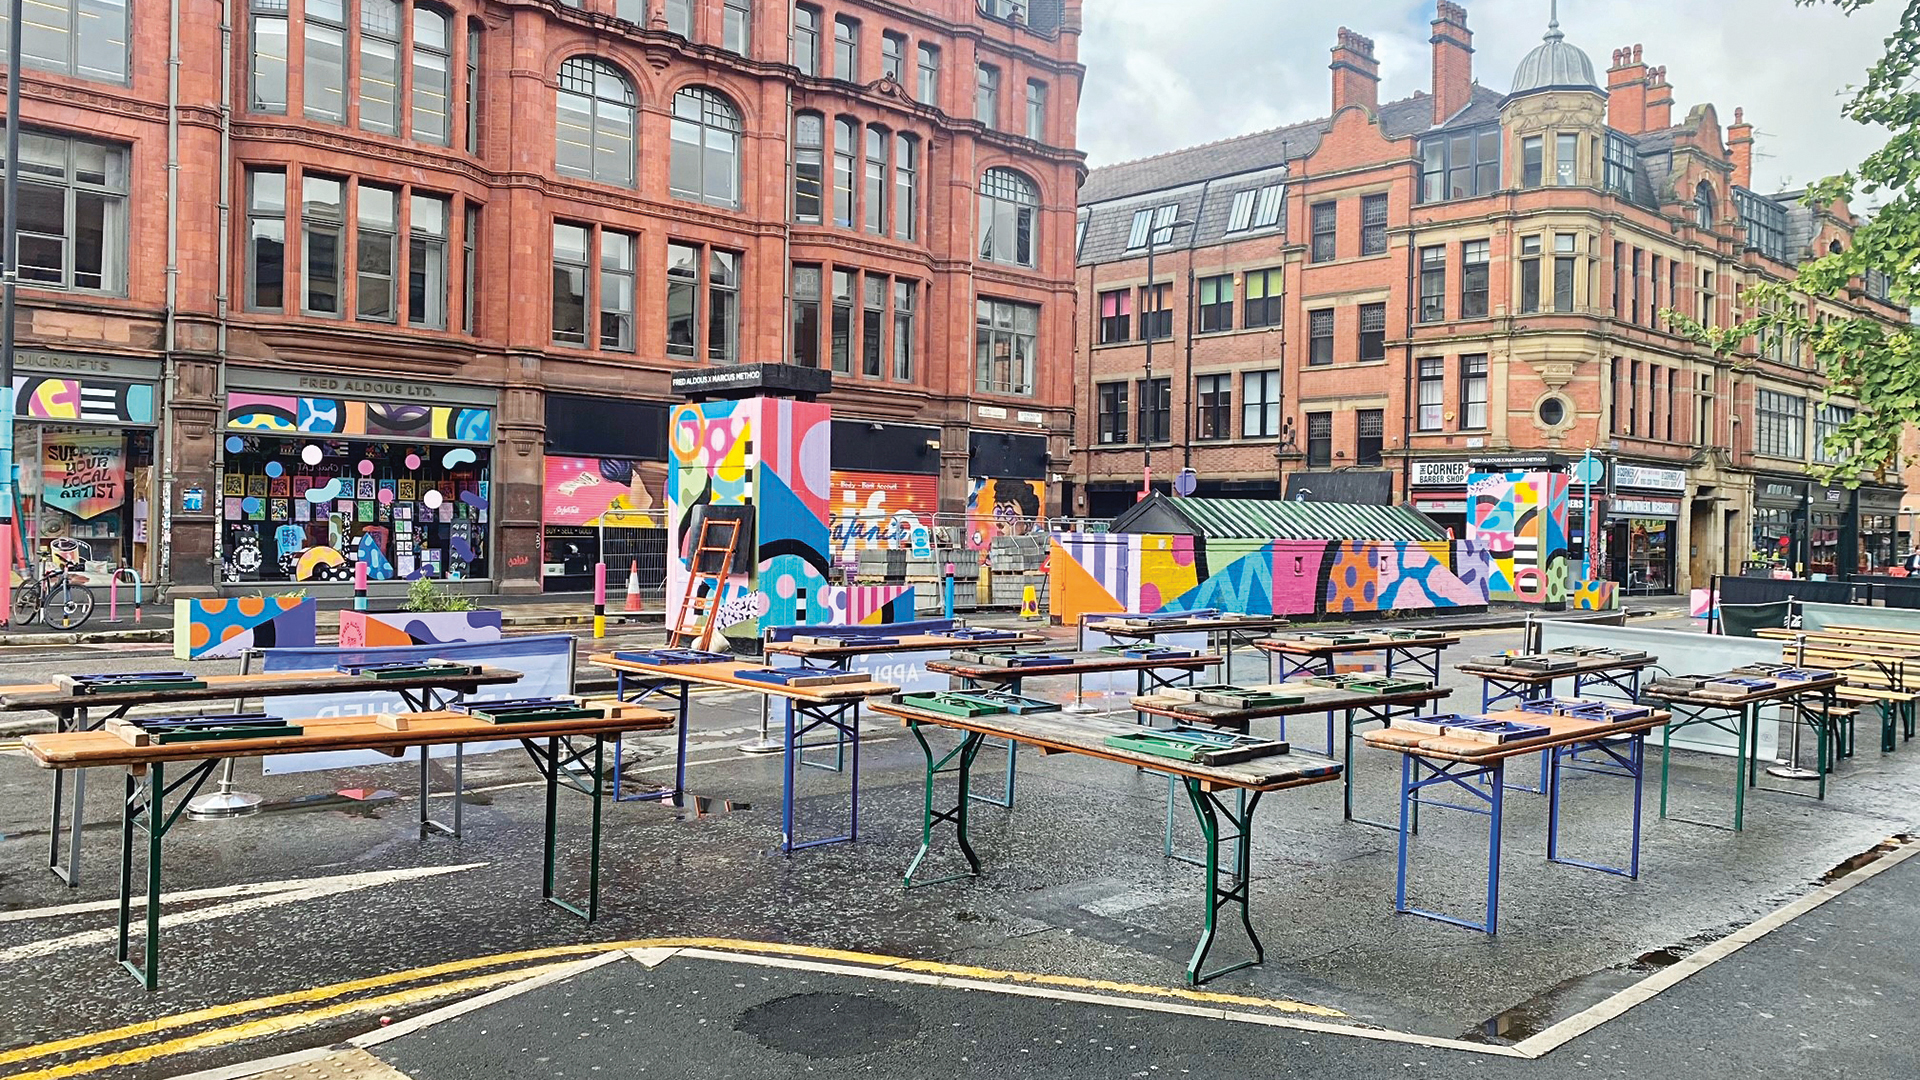 A city square filled with bar tables